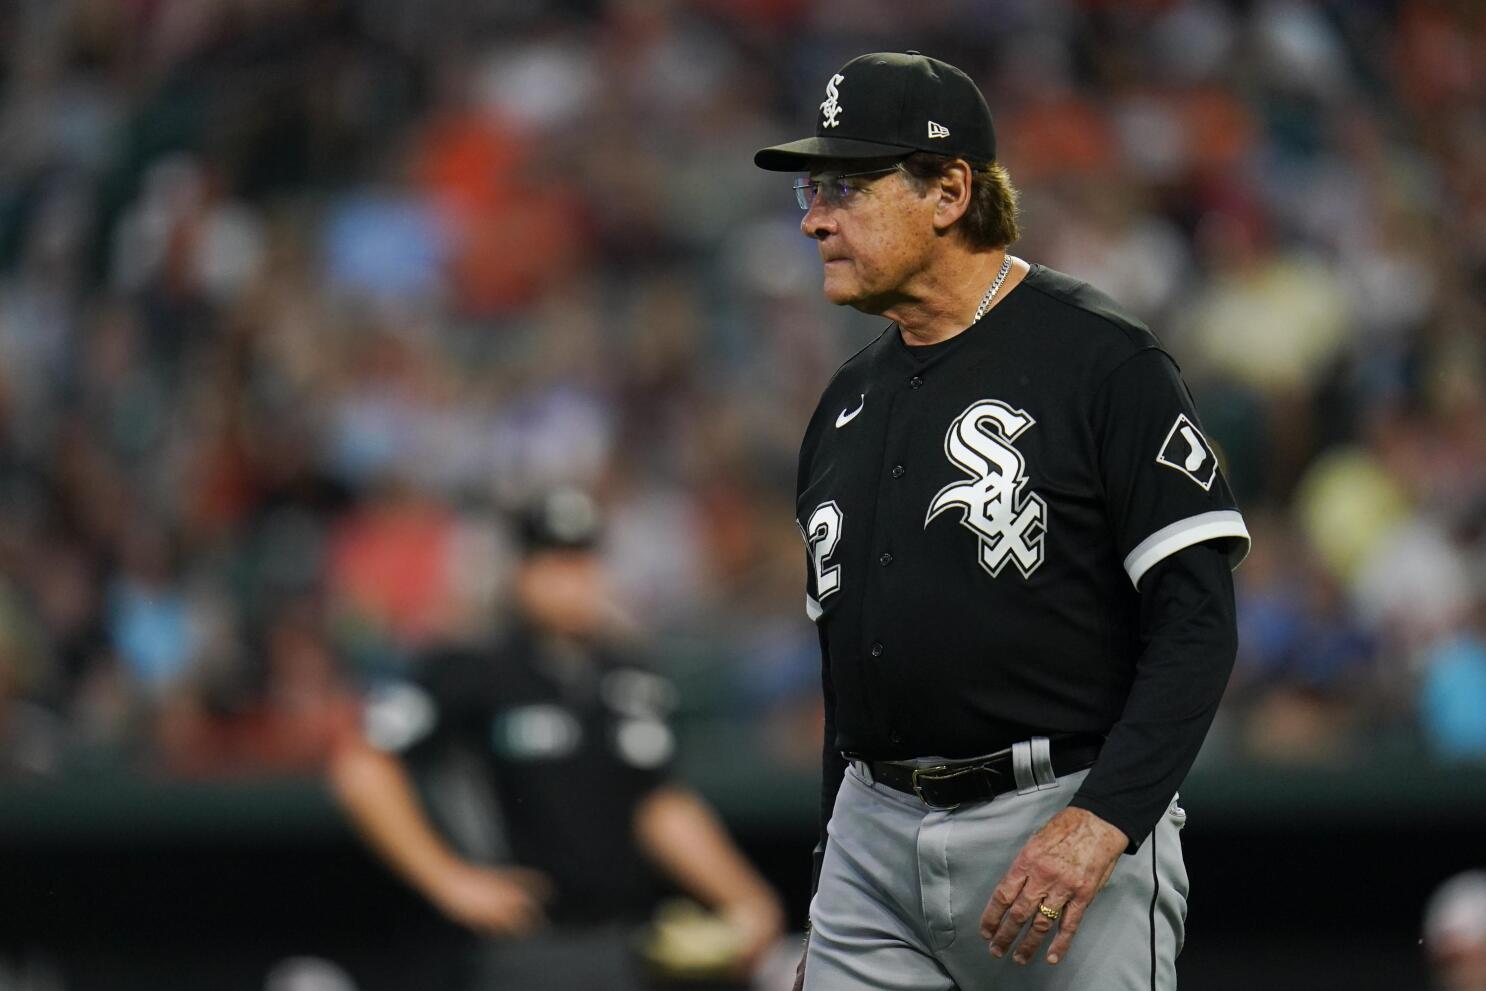 White Sox manager Tony La Russa says he would order walk again